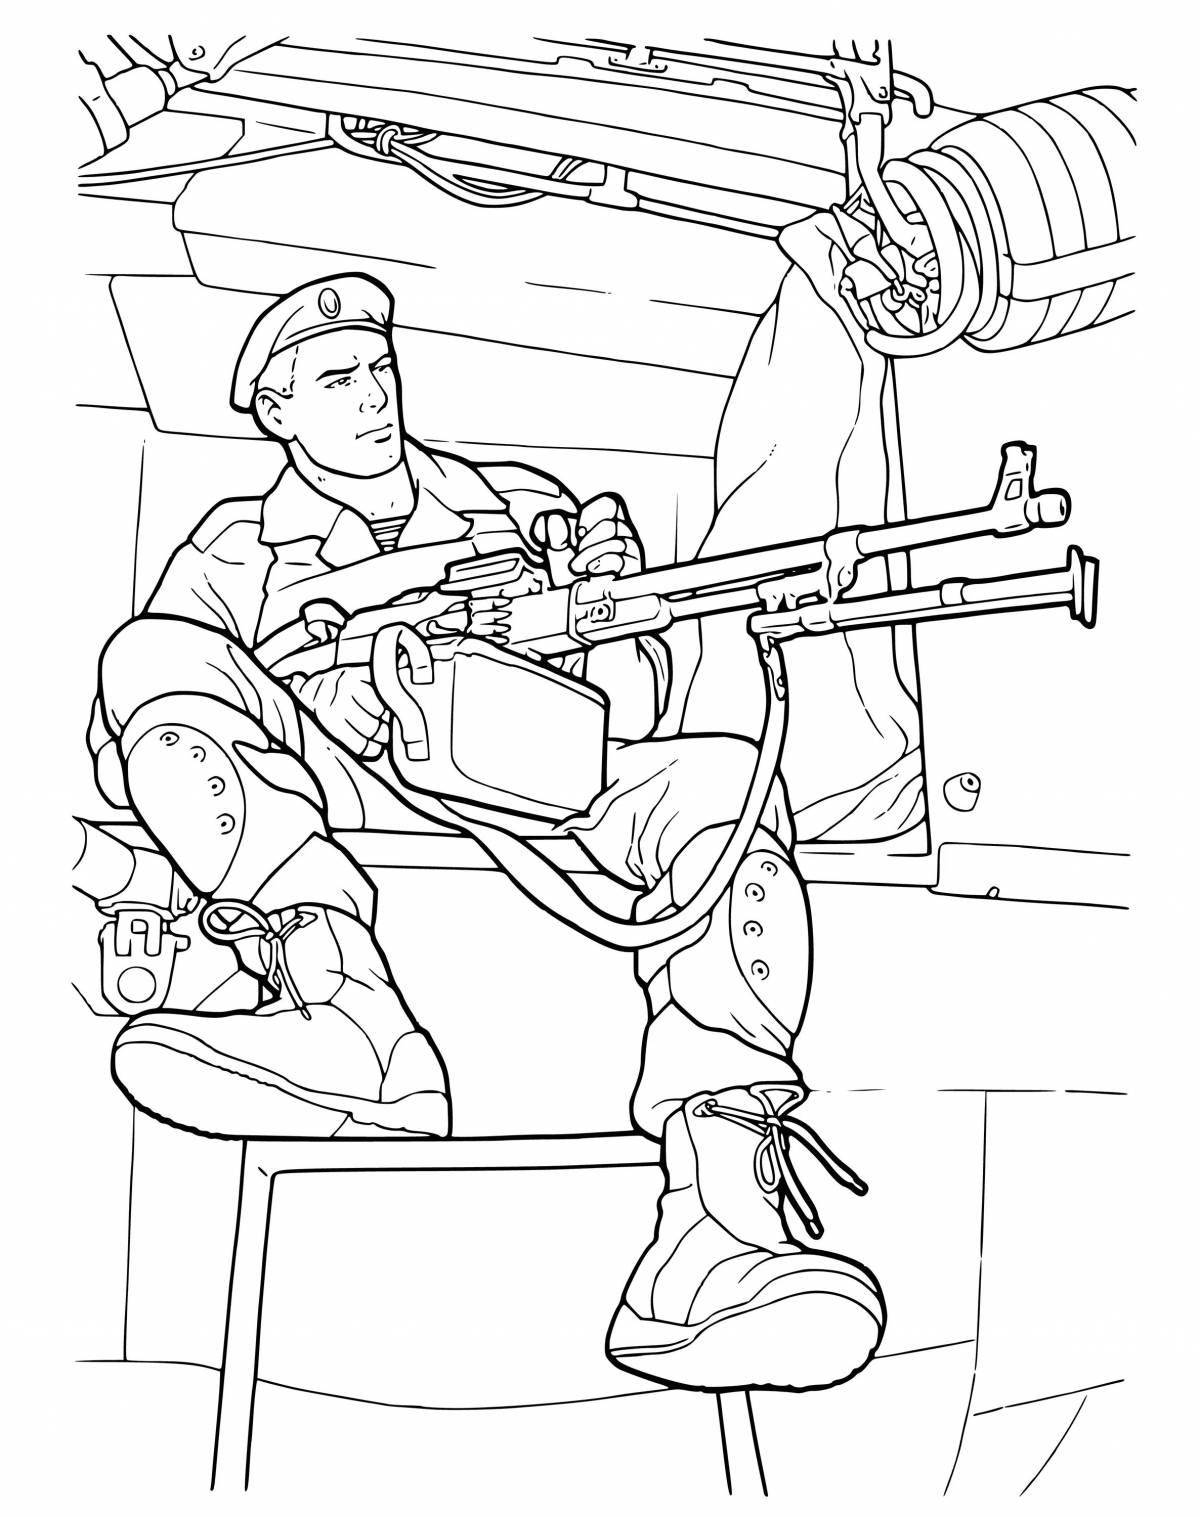 Combat soldier coloring page